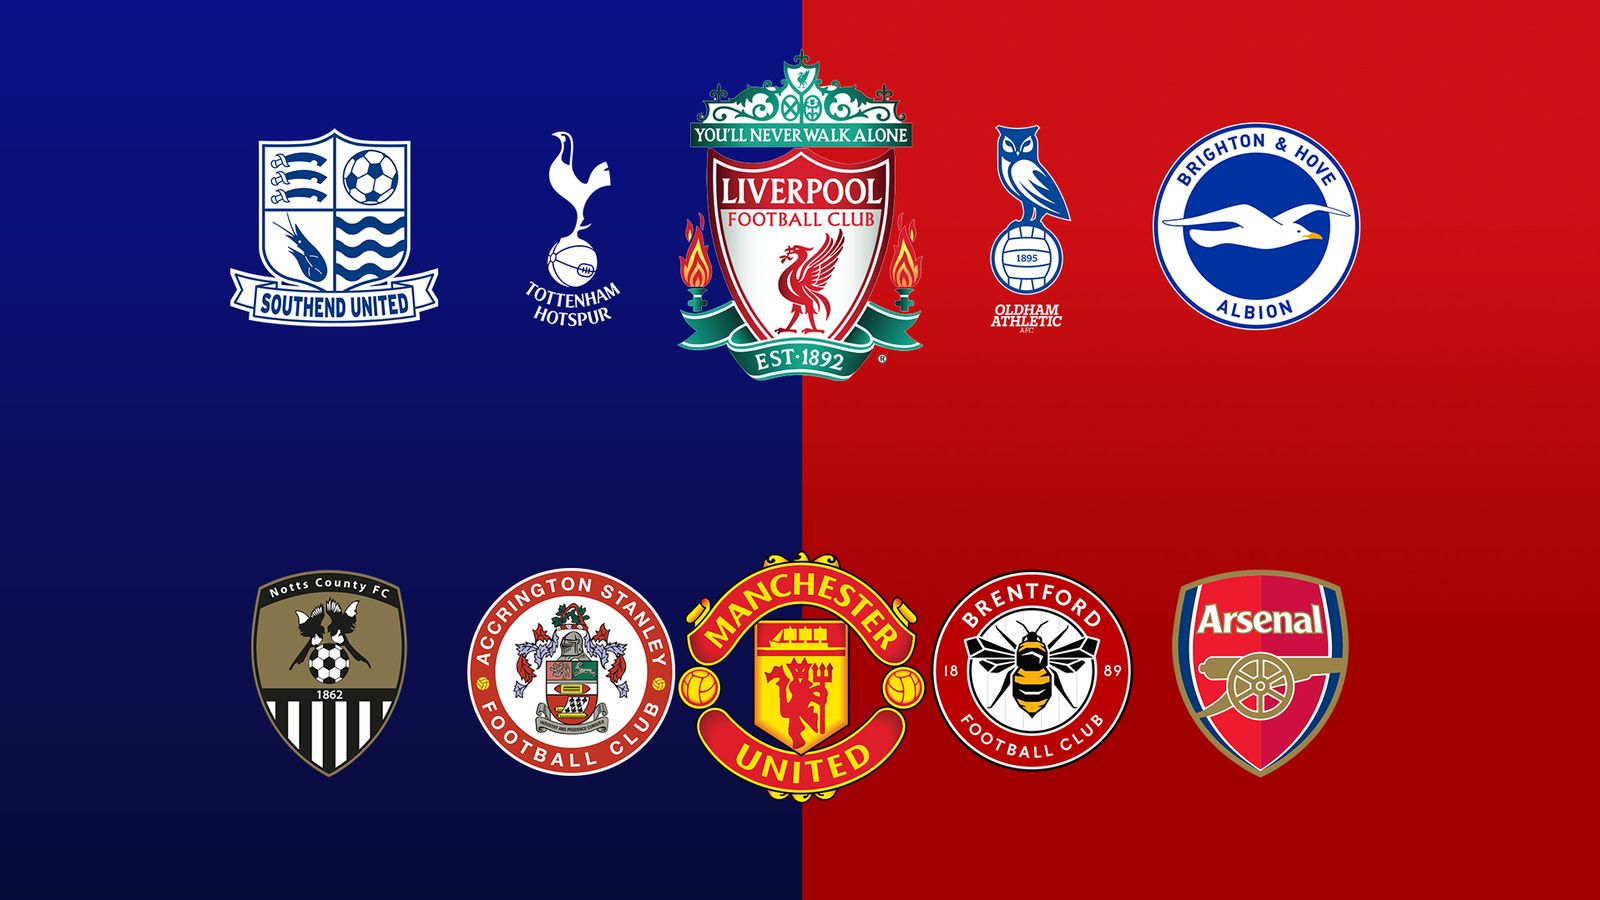 Sky Sports Ultimate League 2021/22: Every club's true standing over past 50 years revealed